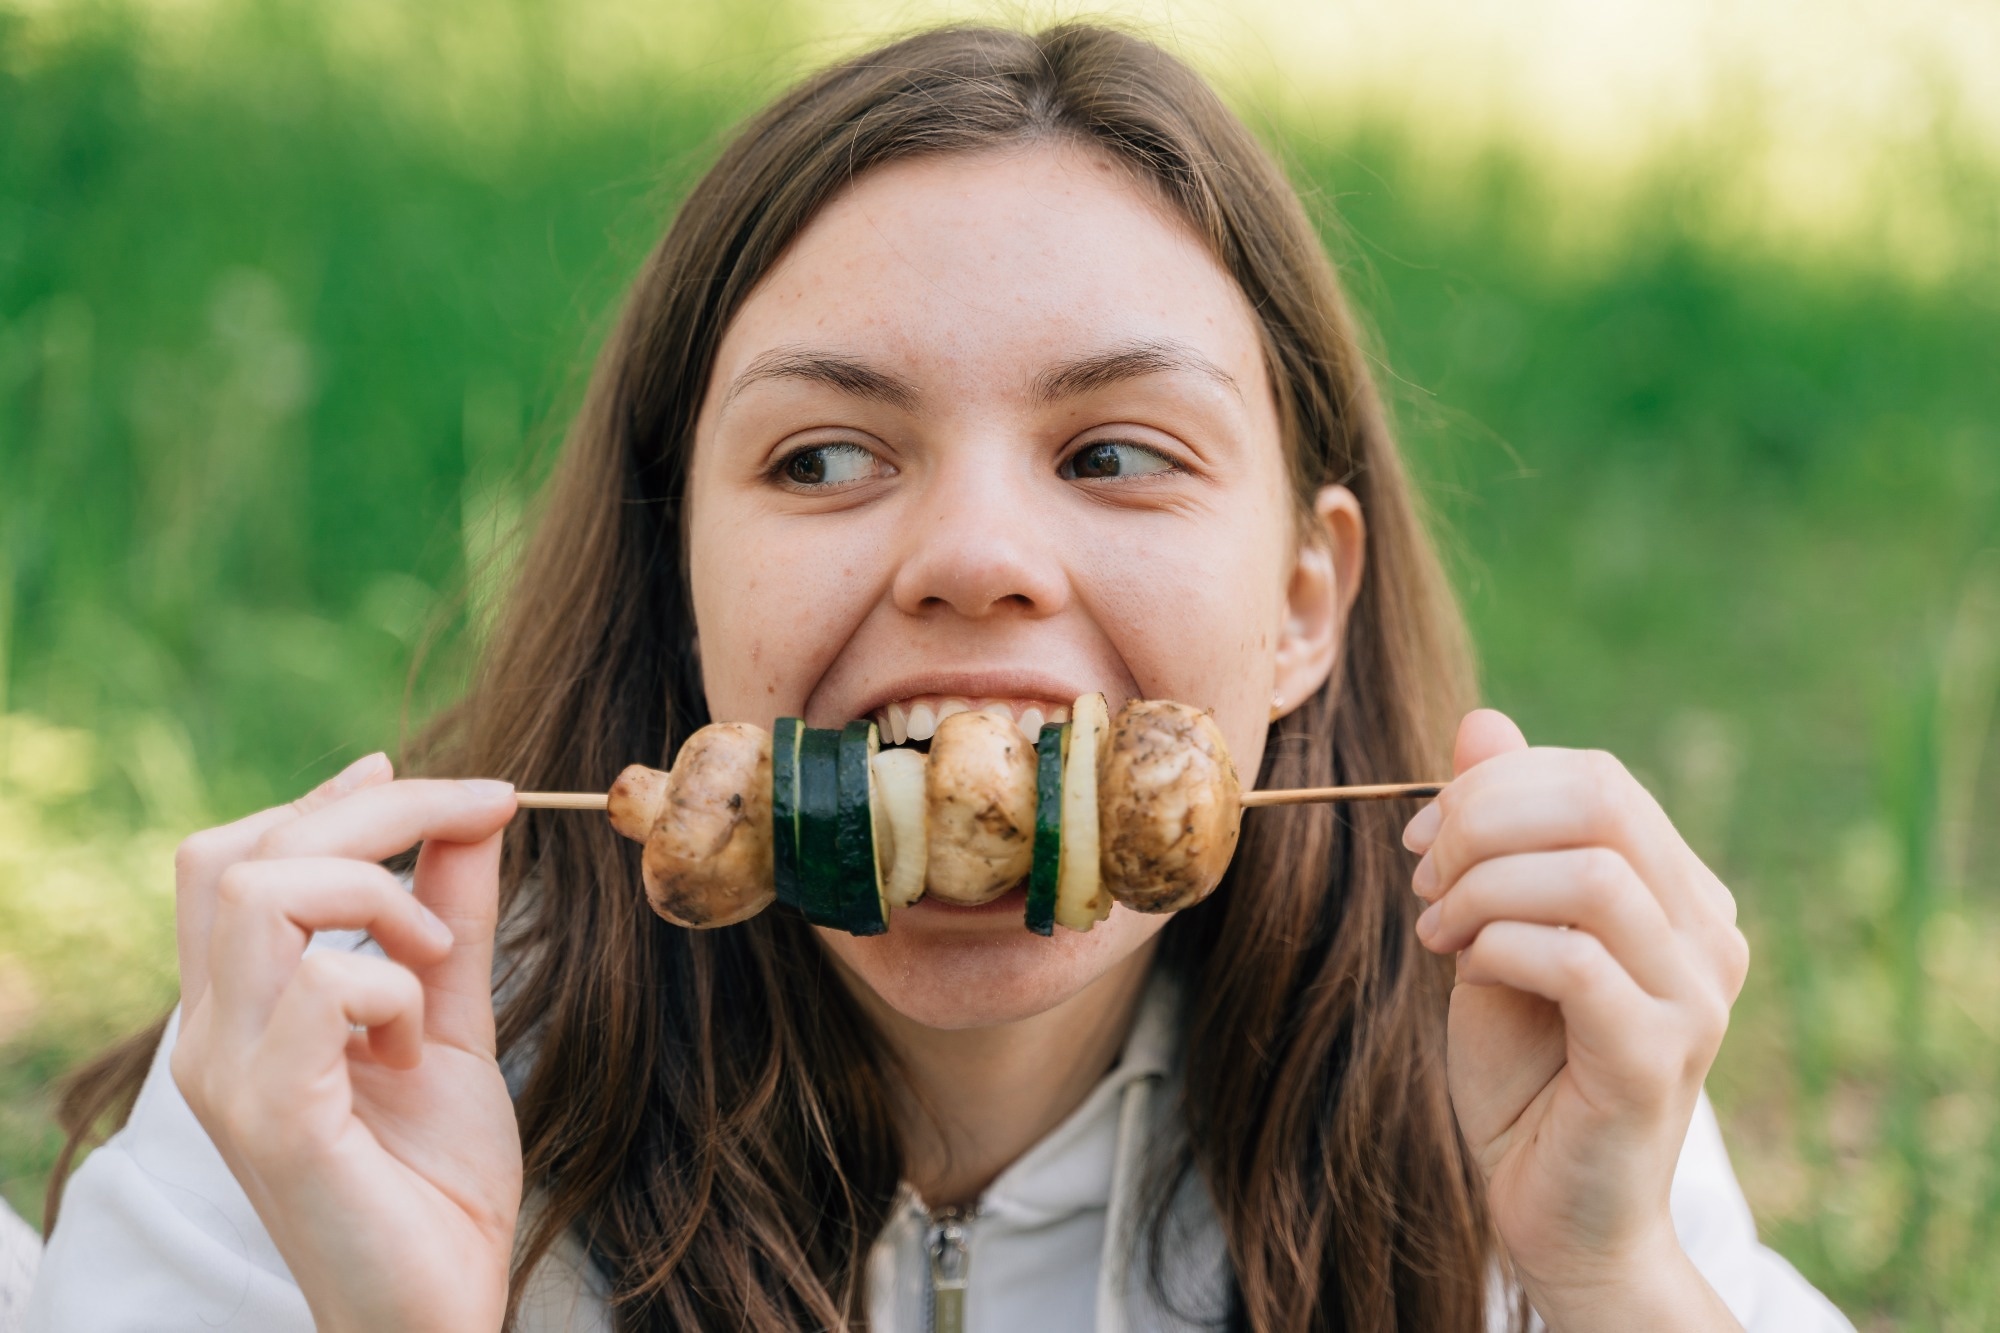 Study: The Relationship Between Mushroom Consumption and Cognitive Performance - An Epidemiological Study in the Framework of European Cancer Research – Norfolk Cohort (EPIC-Norfolk). Image Credit: Trojan/Shutterstock.com